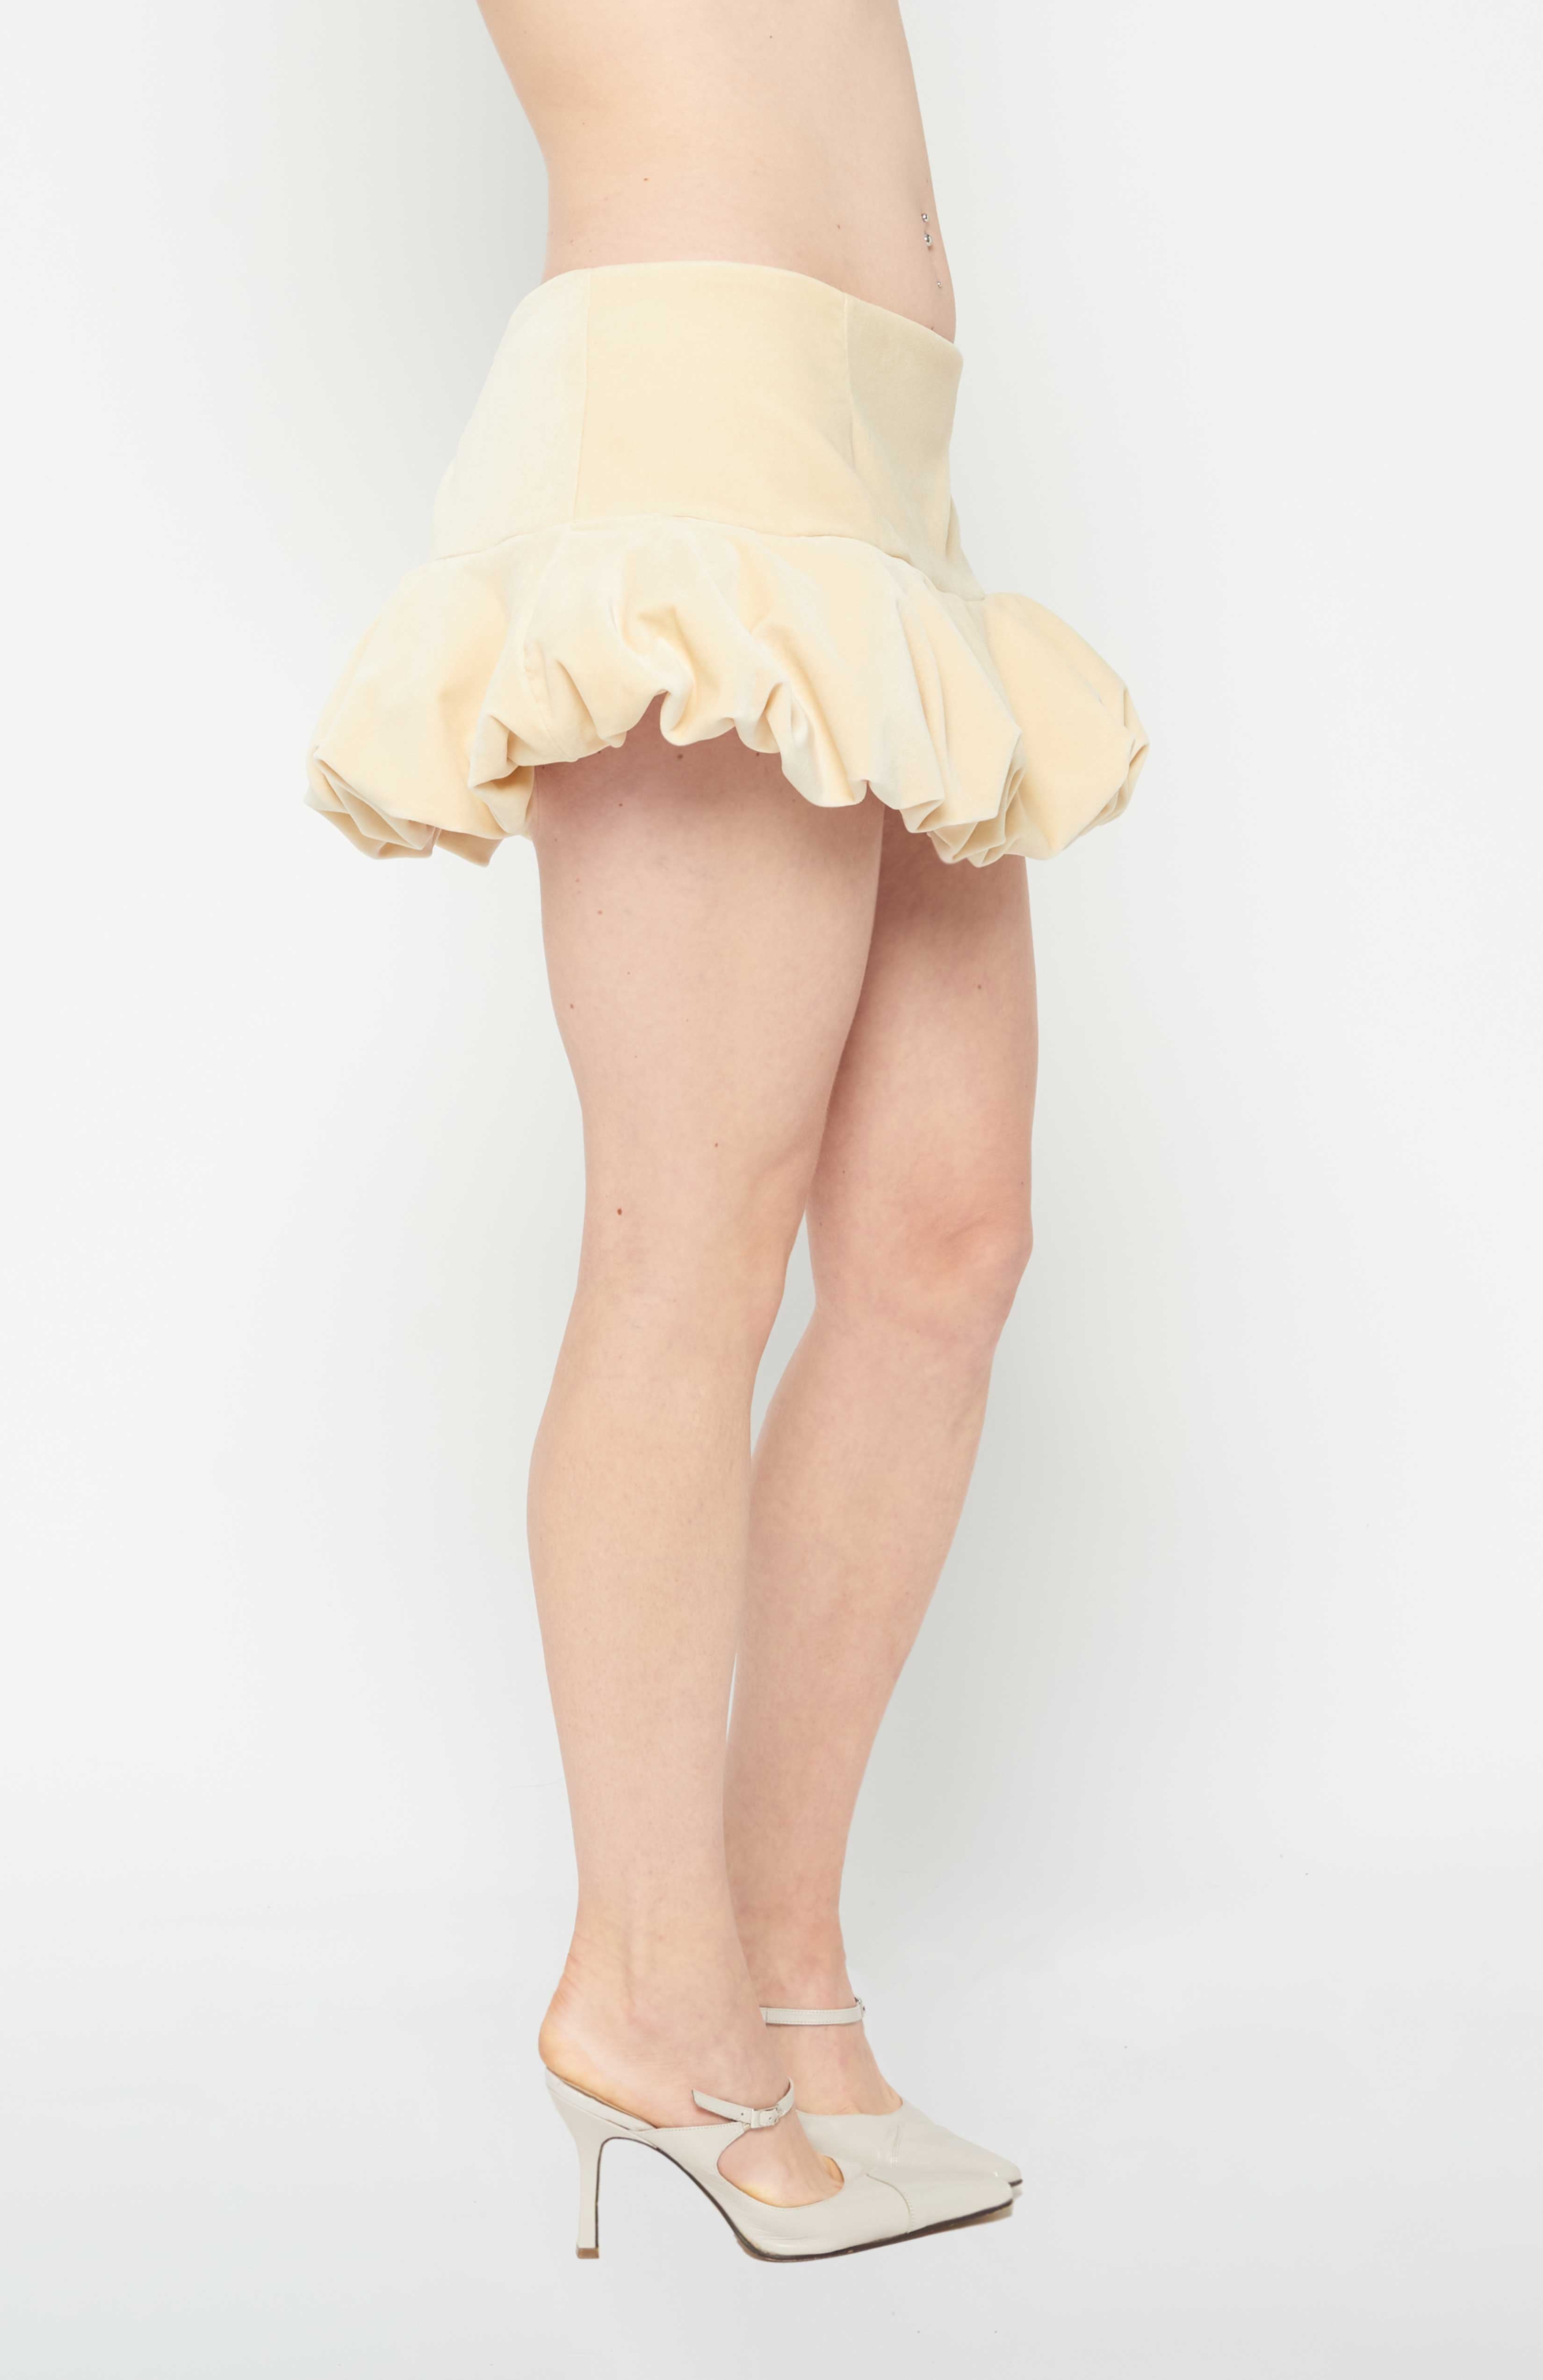 A flirty playful bubble mid waisted mini skirt that salutes the fashion trends of the 1980s. This mid rise puffball style is created with a crinoline inner foundation to hold its balloon-like shape. A wonderful way to add volume to a silhouette.